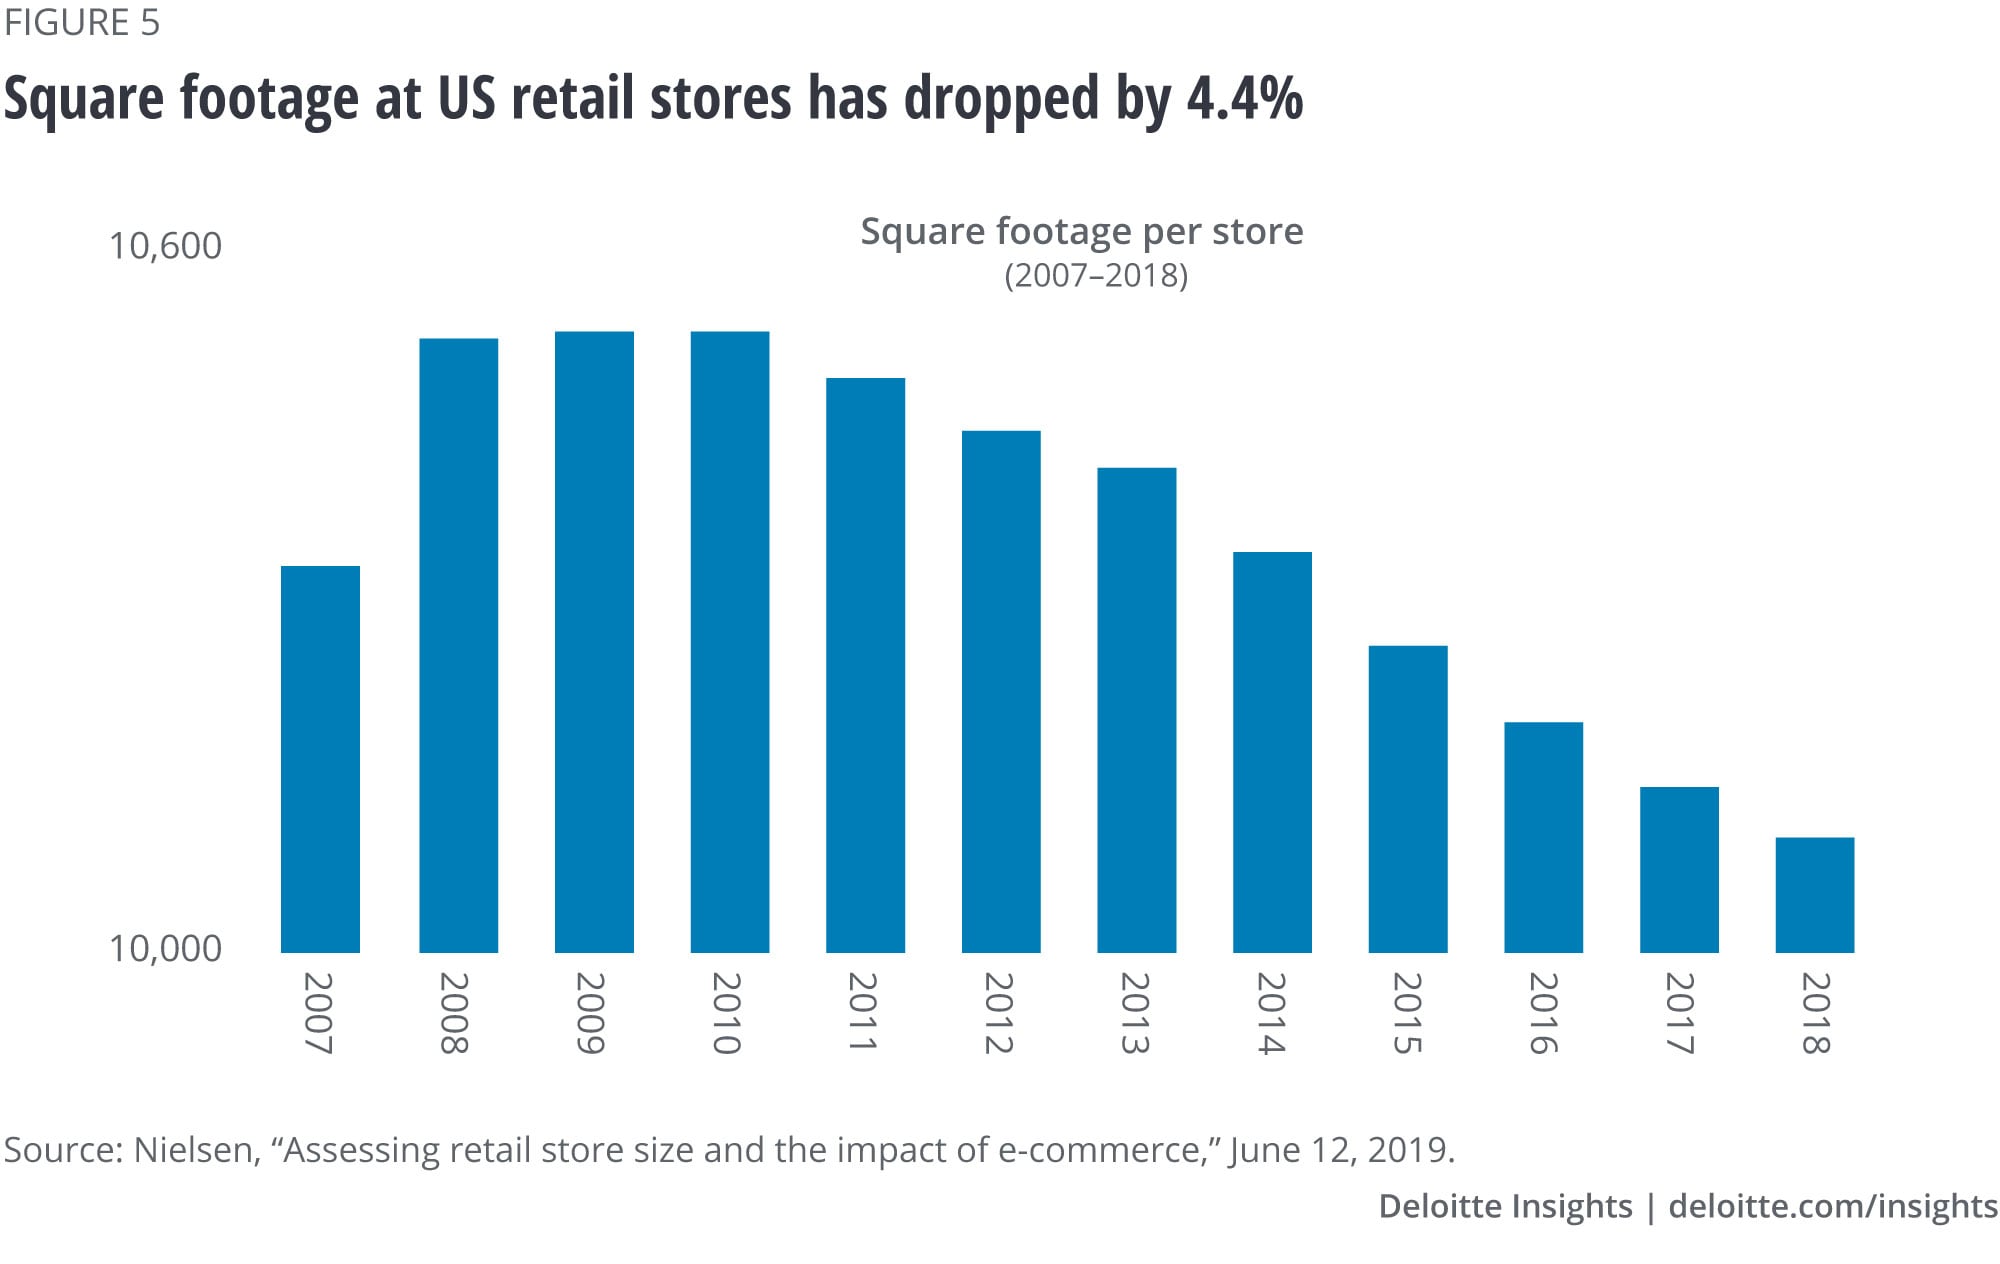 Square footage at US retail stores has dropped by 4.4 percent